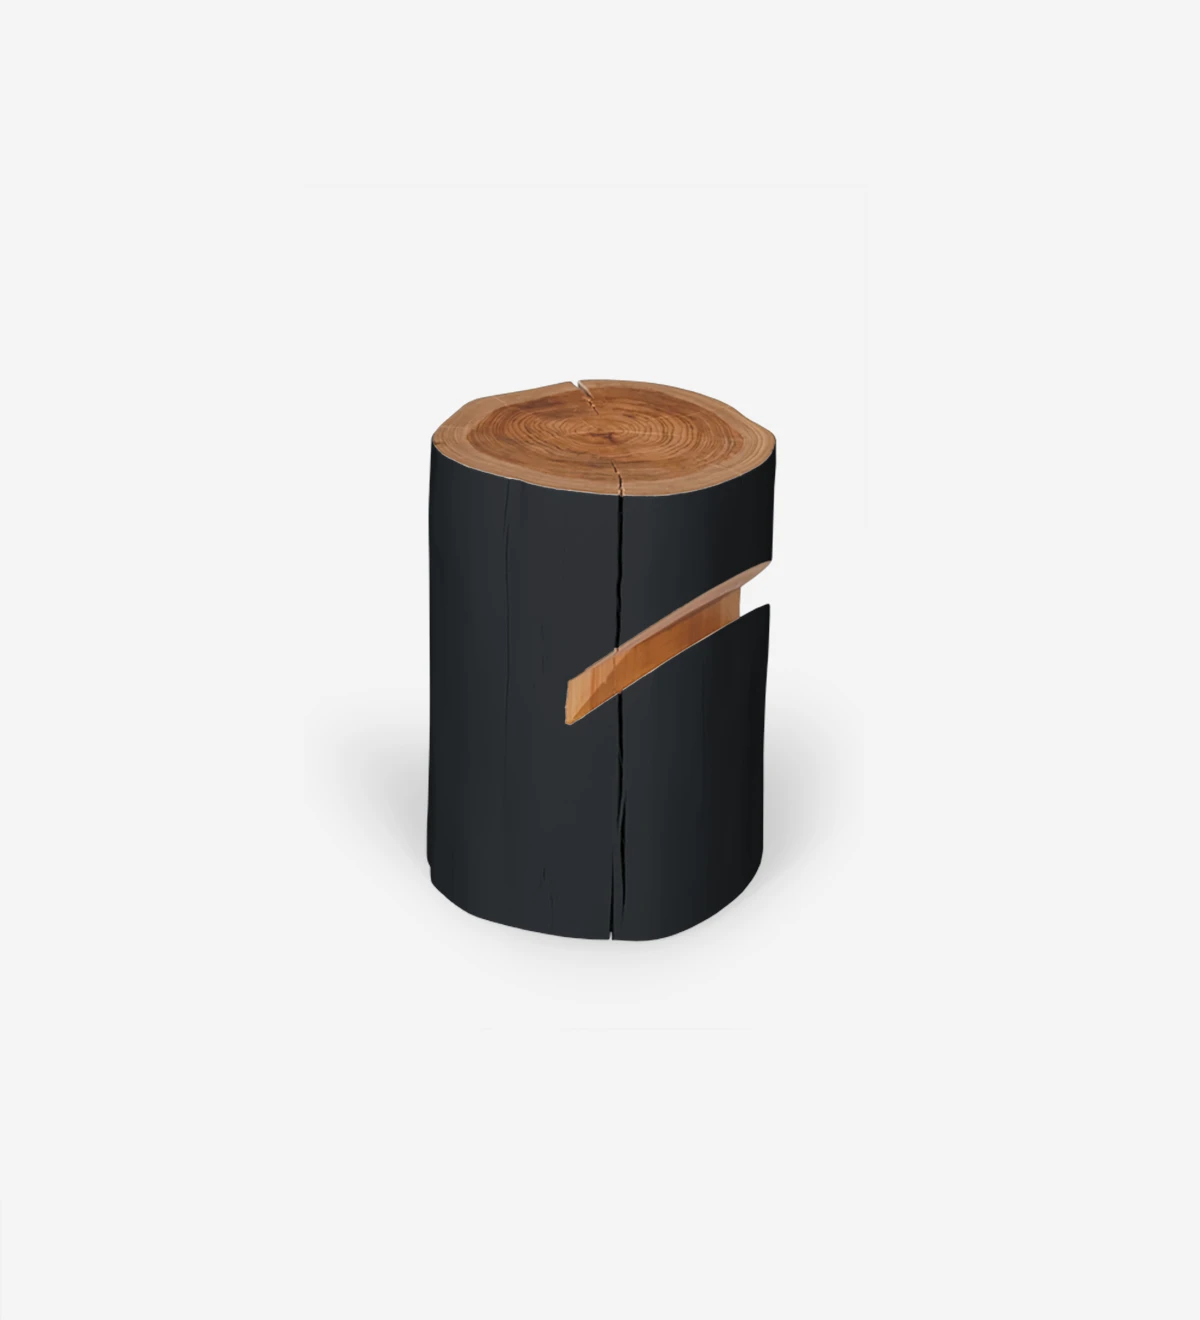 Bedside table in natural cryptomeria wood lacquered in black